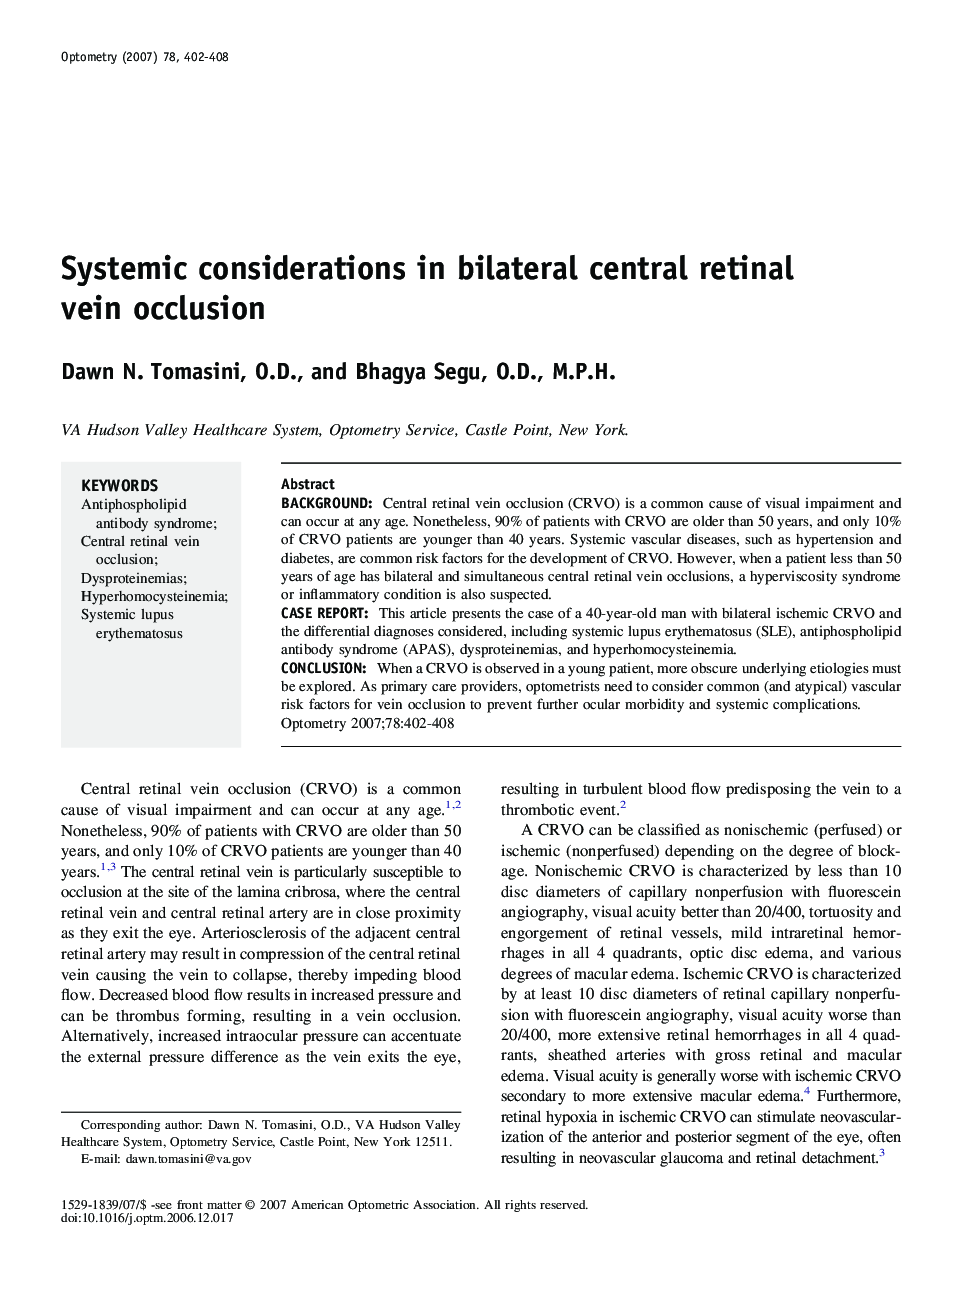 Systemic considerations in bilateral central retinal vein occlusion